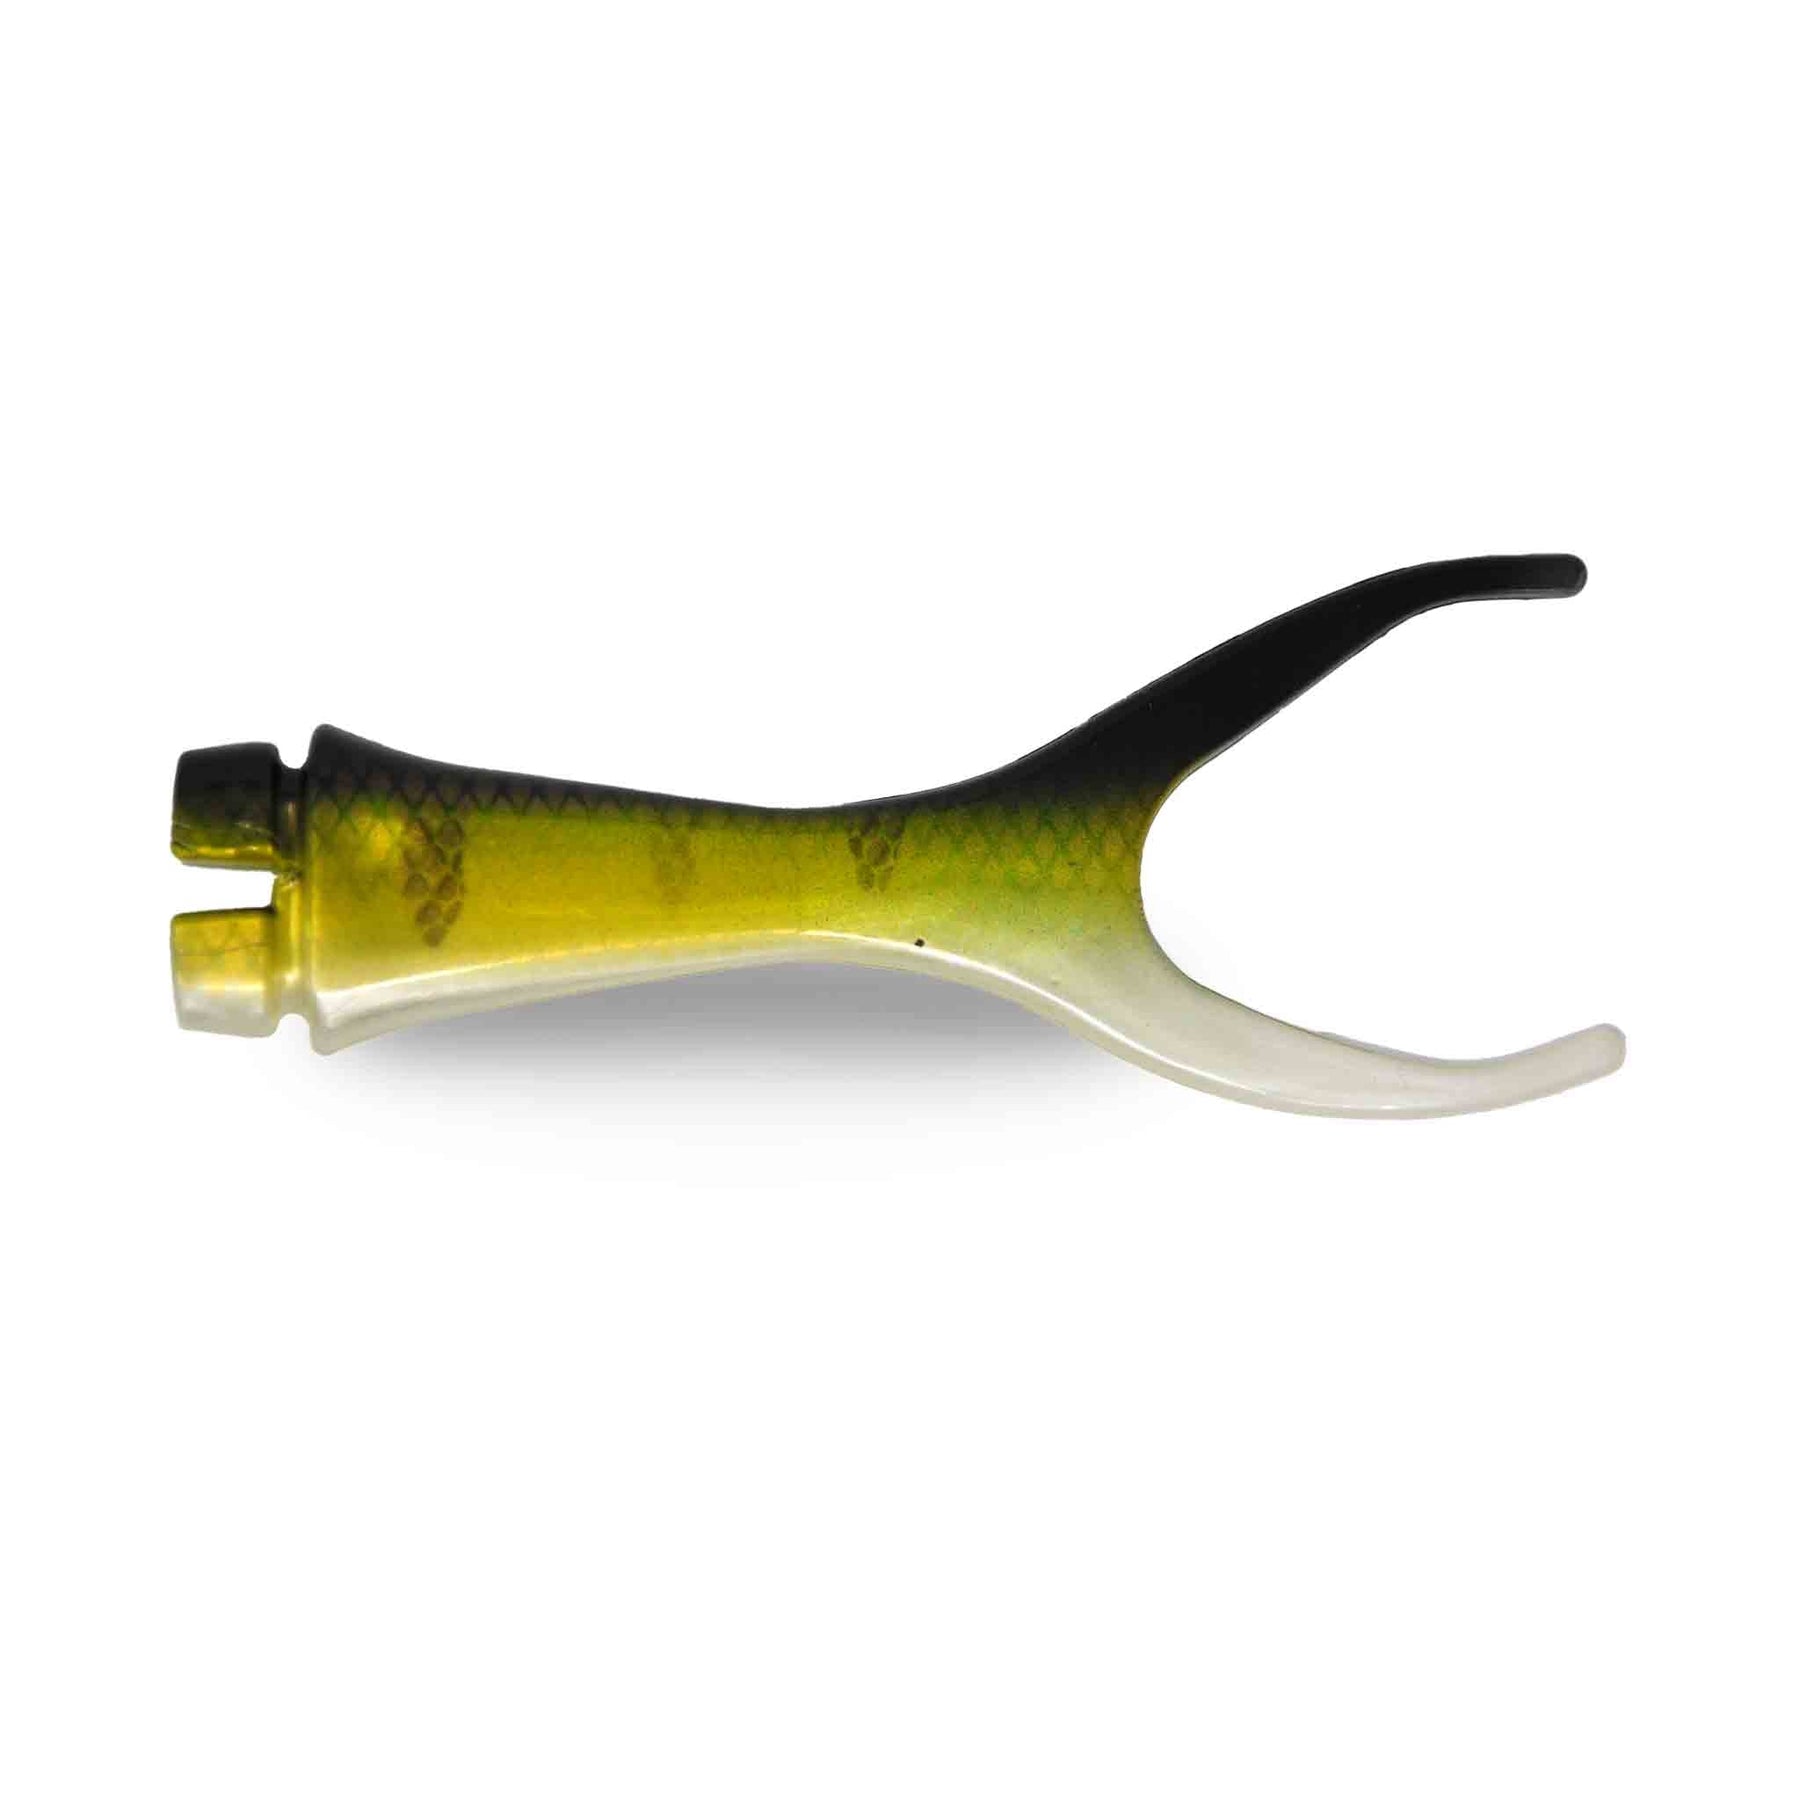 View of Replacement_Tails Musky Innovations Shallow Invader Replacement Tail Reflex Natural Perch available at EZOKO Pike and Musky Shop